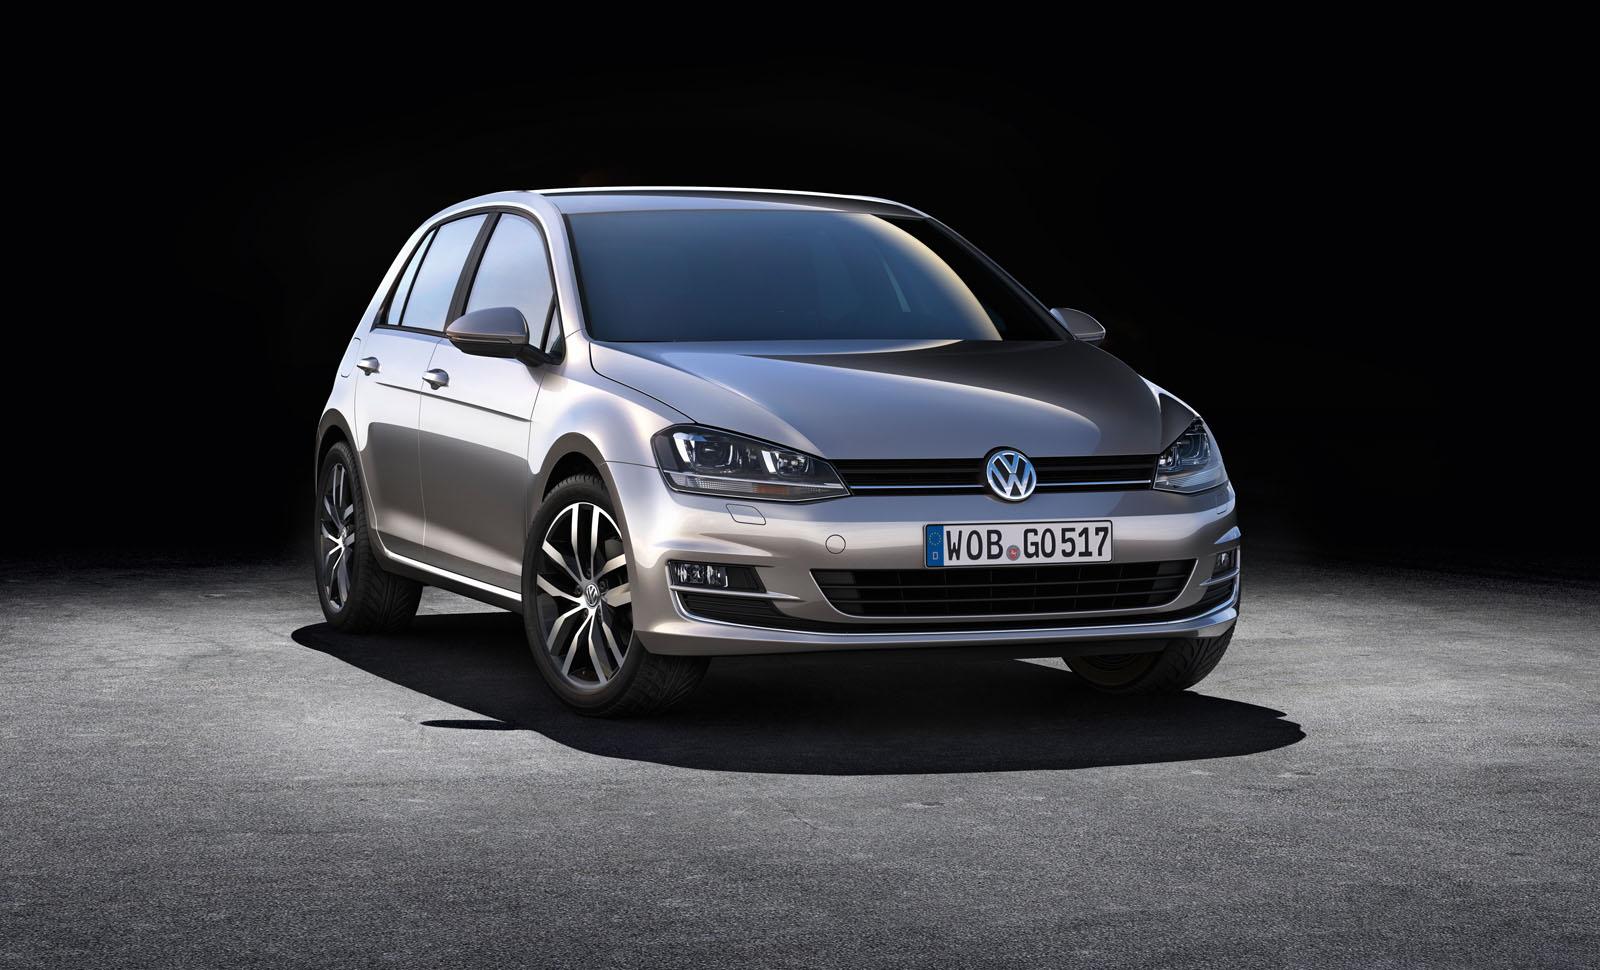 Volkswagen Golf VII Official Specs and Images Released